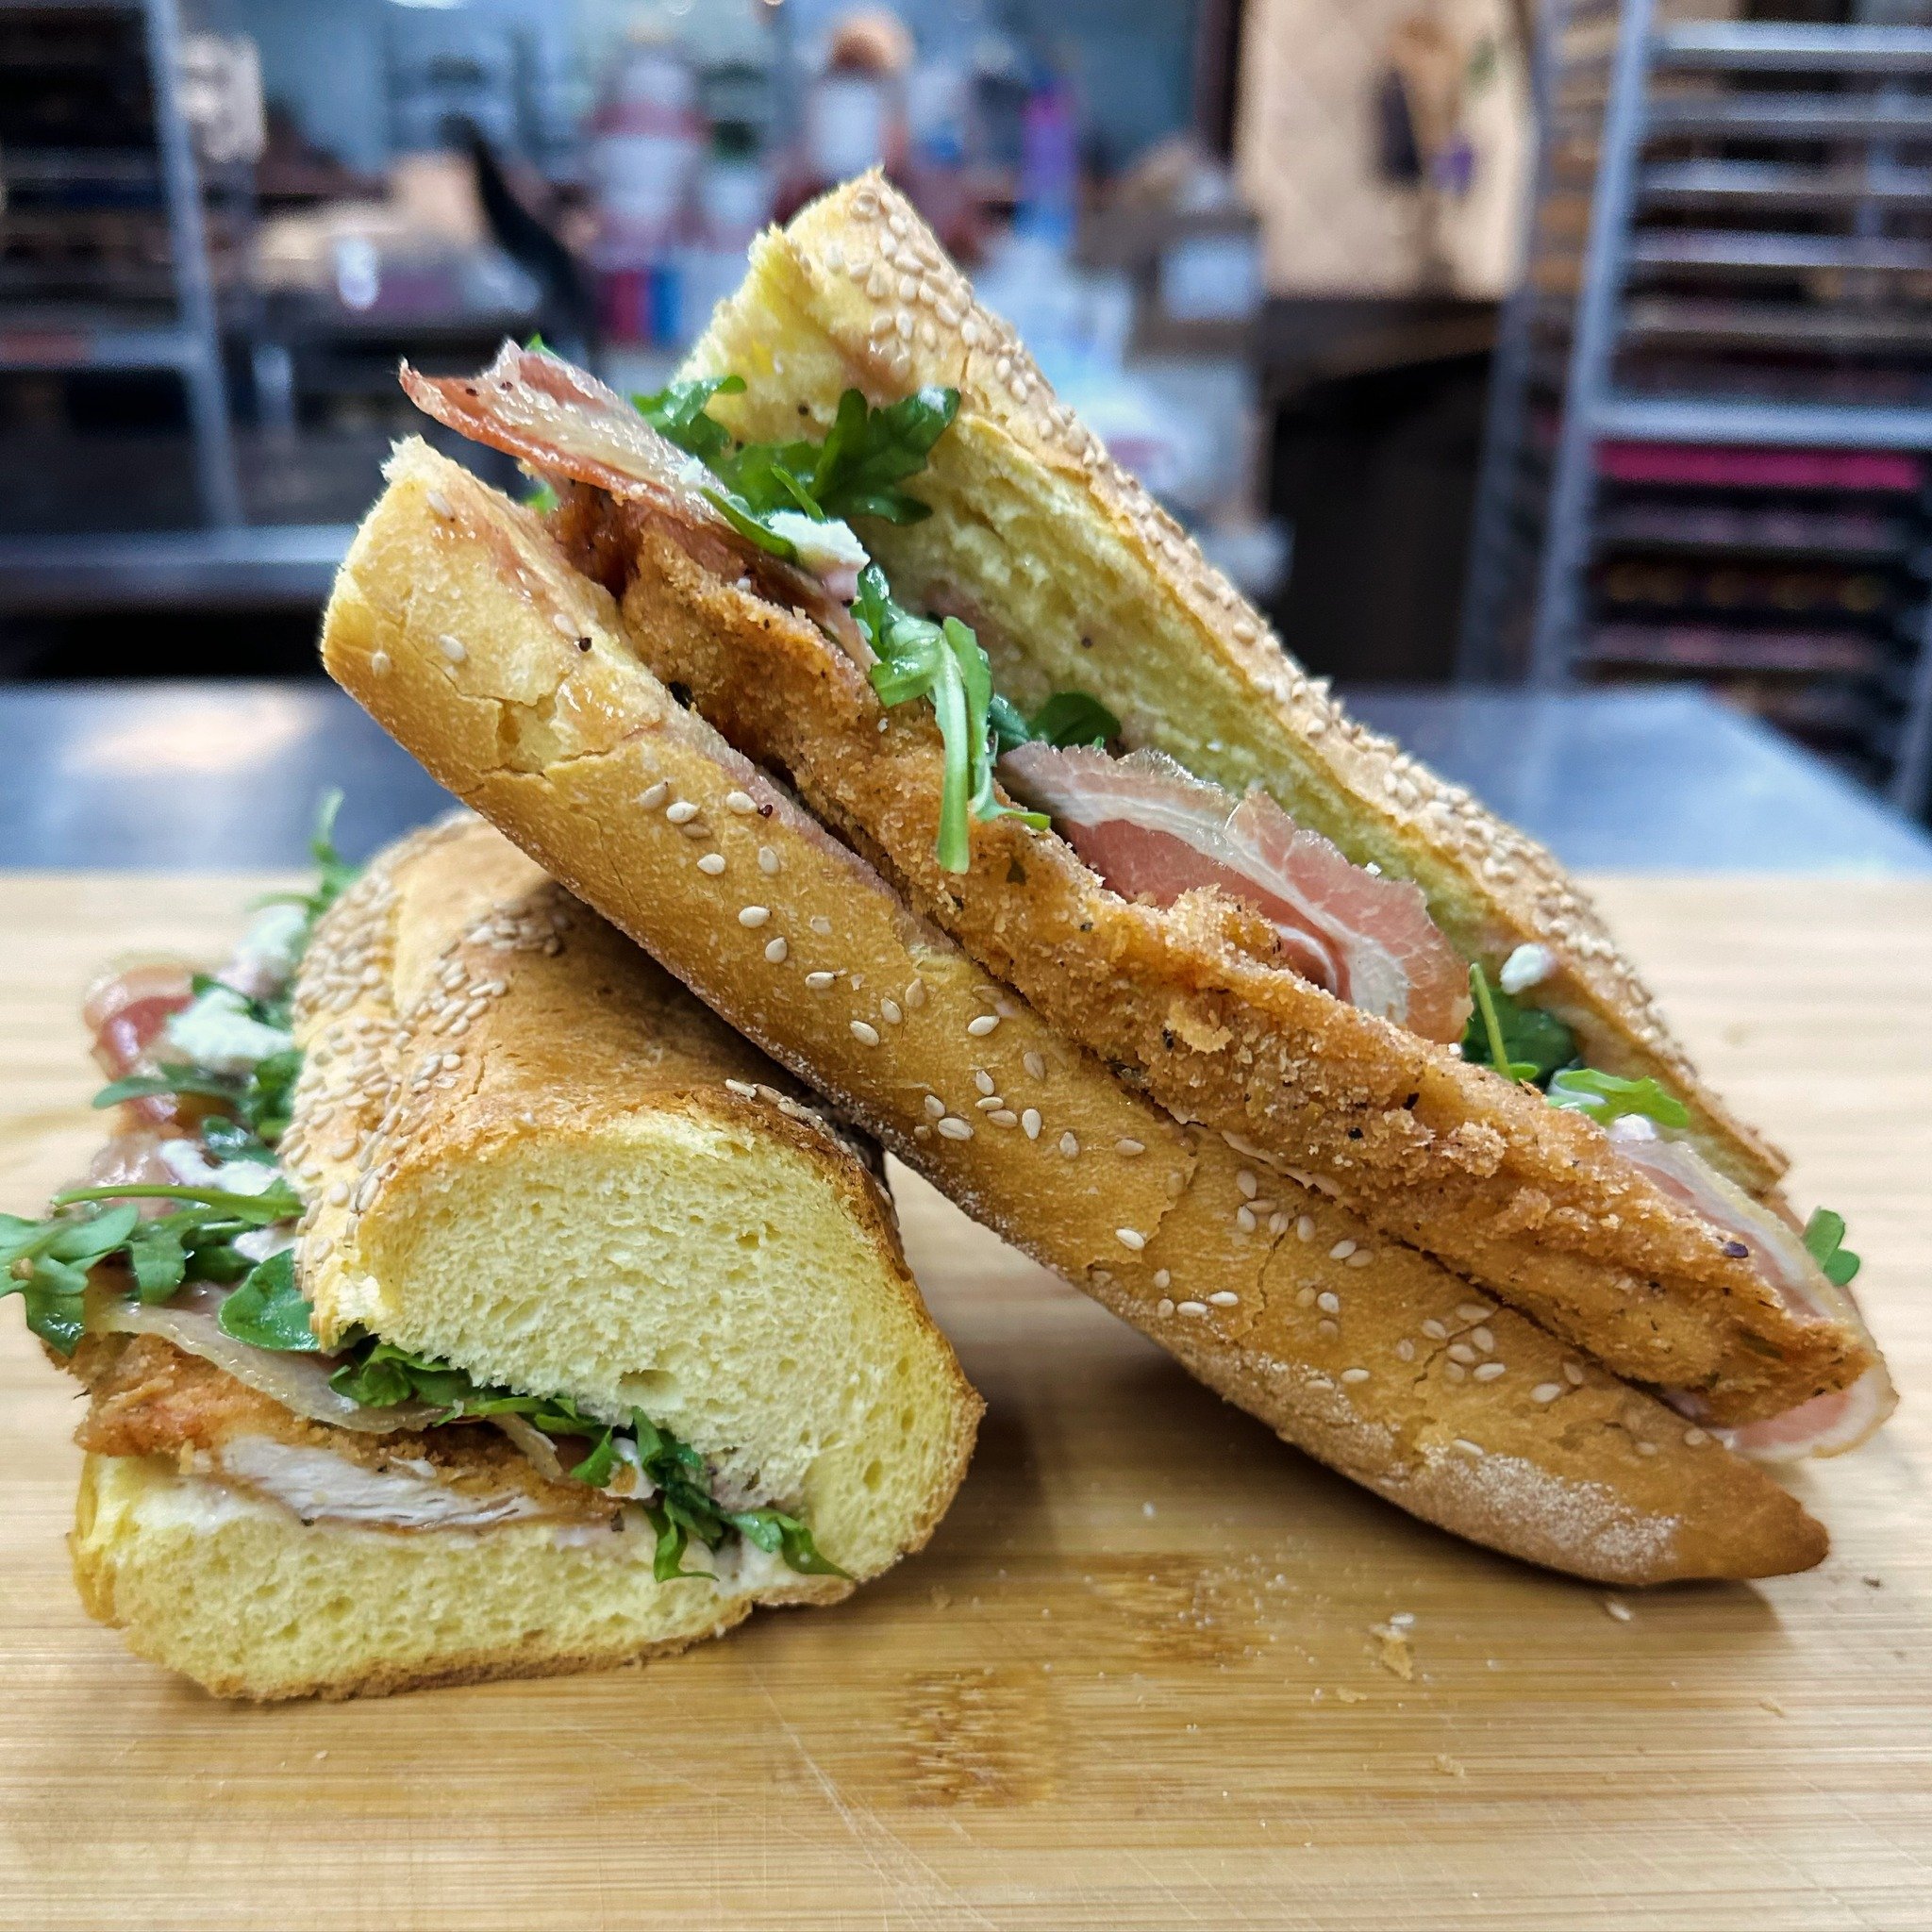 🚨SANDWICH SATURDAY🚨
Available Saturday, May 11th ONLY!
✨ The Mother Clucker Sandwich ✨

An artisanal semolina or brioche baguette, raspberry aioli, fried chicken cutlets, crisped pancetta, arugula, thinly sliced pears, crumbled feta, and finished w